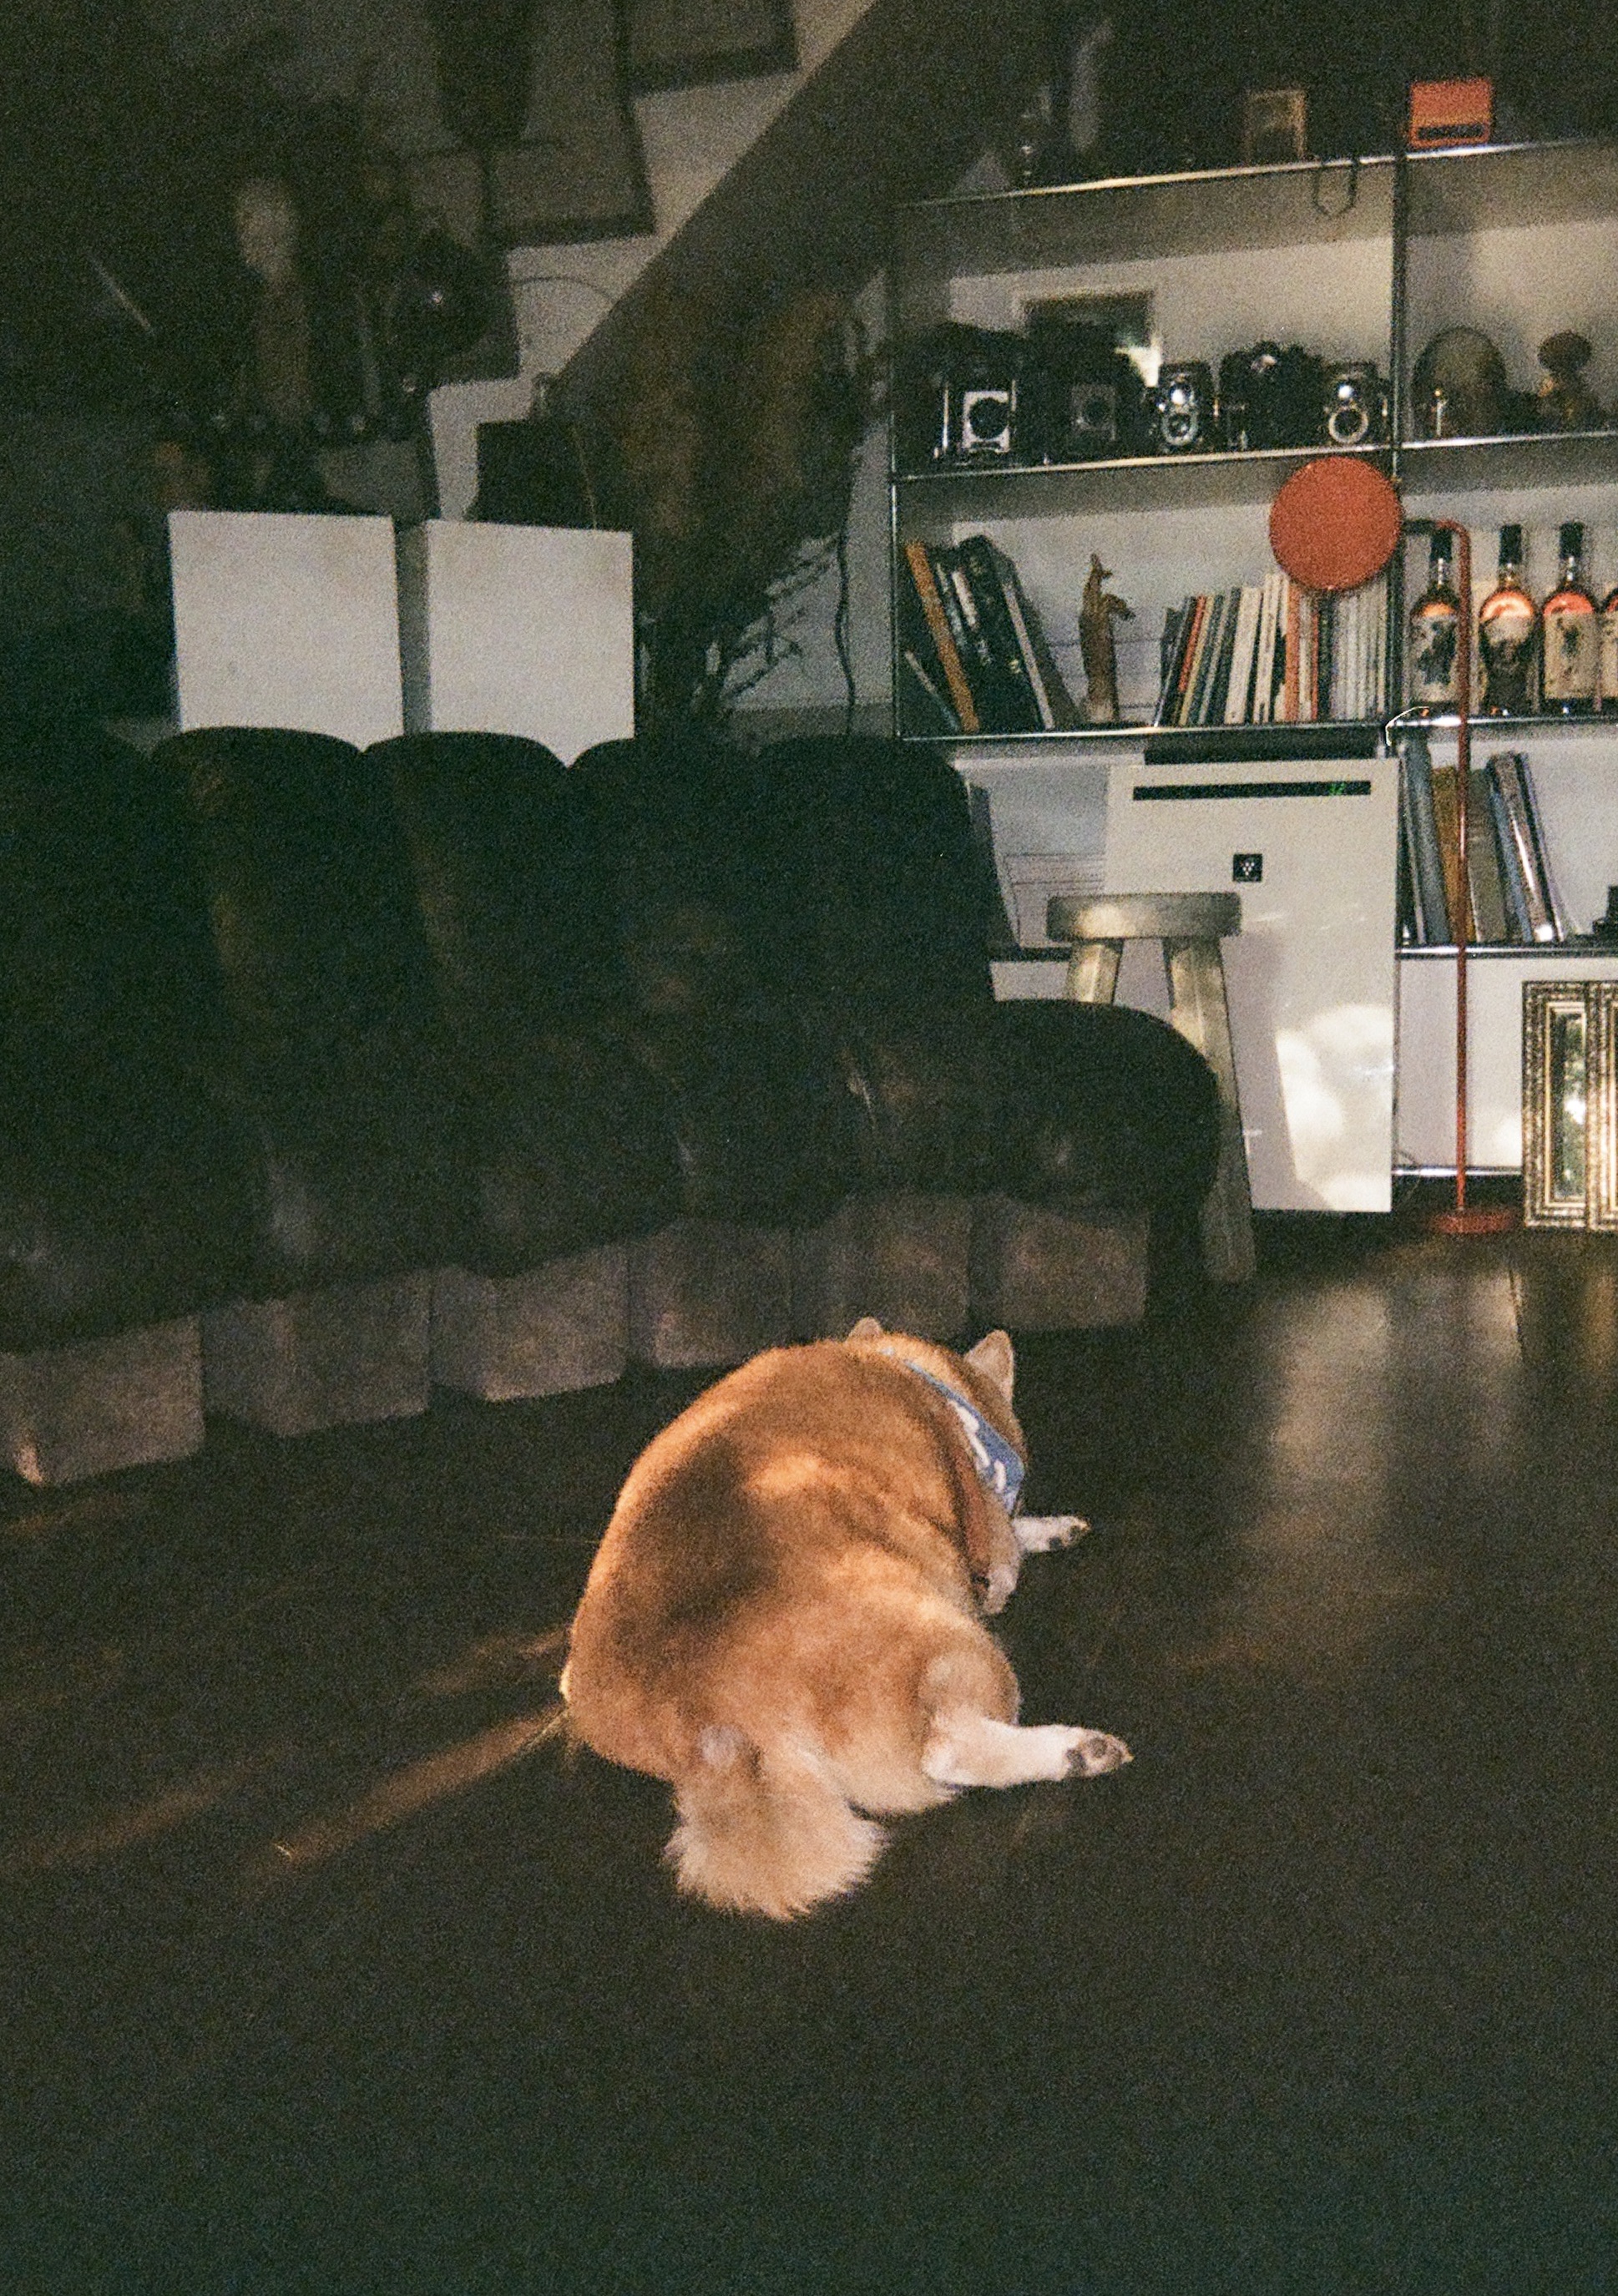 A shiba laying on the floor with its butt facing the camera in a furniture store